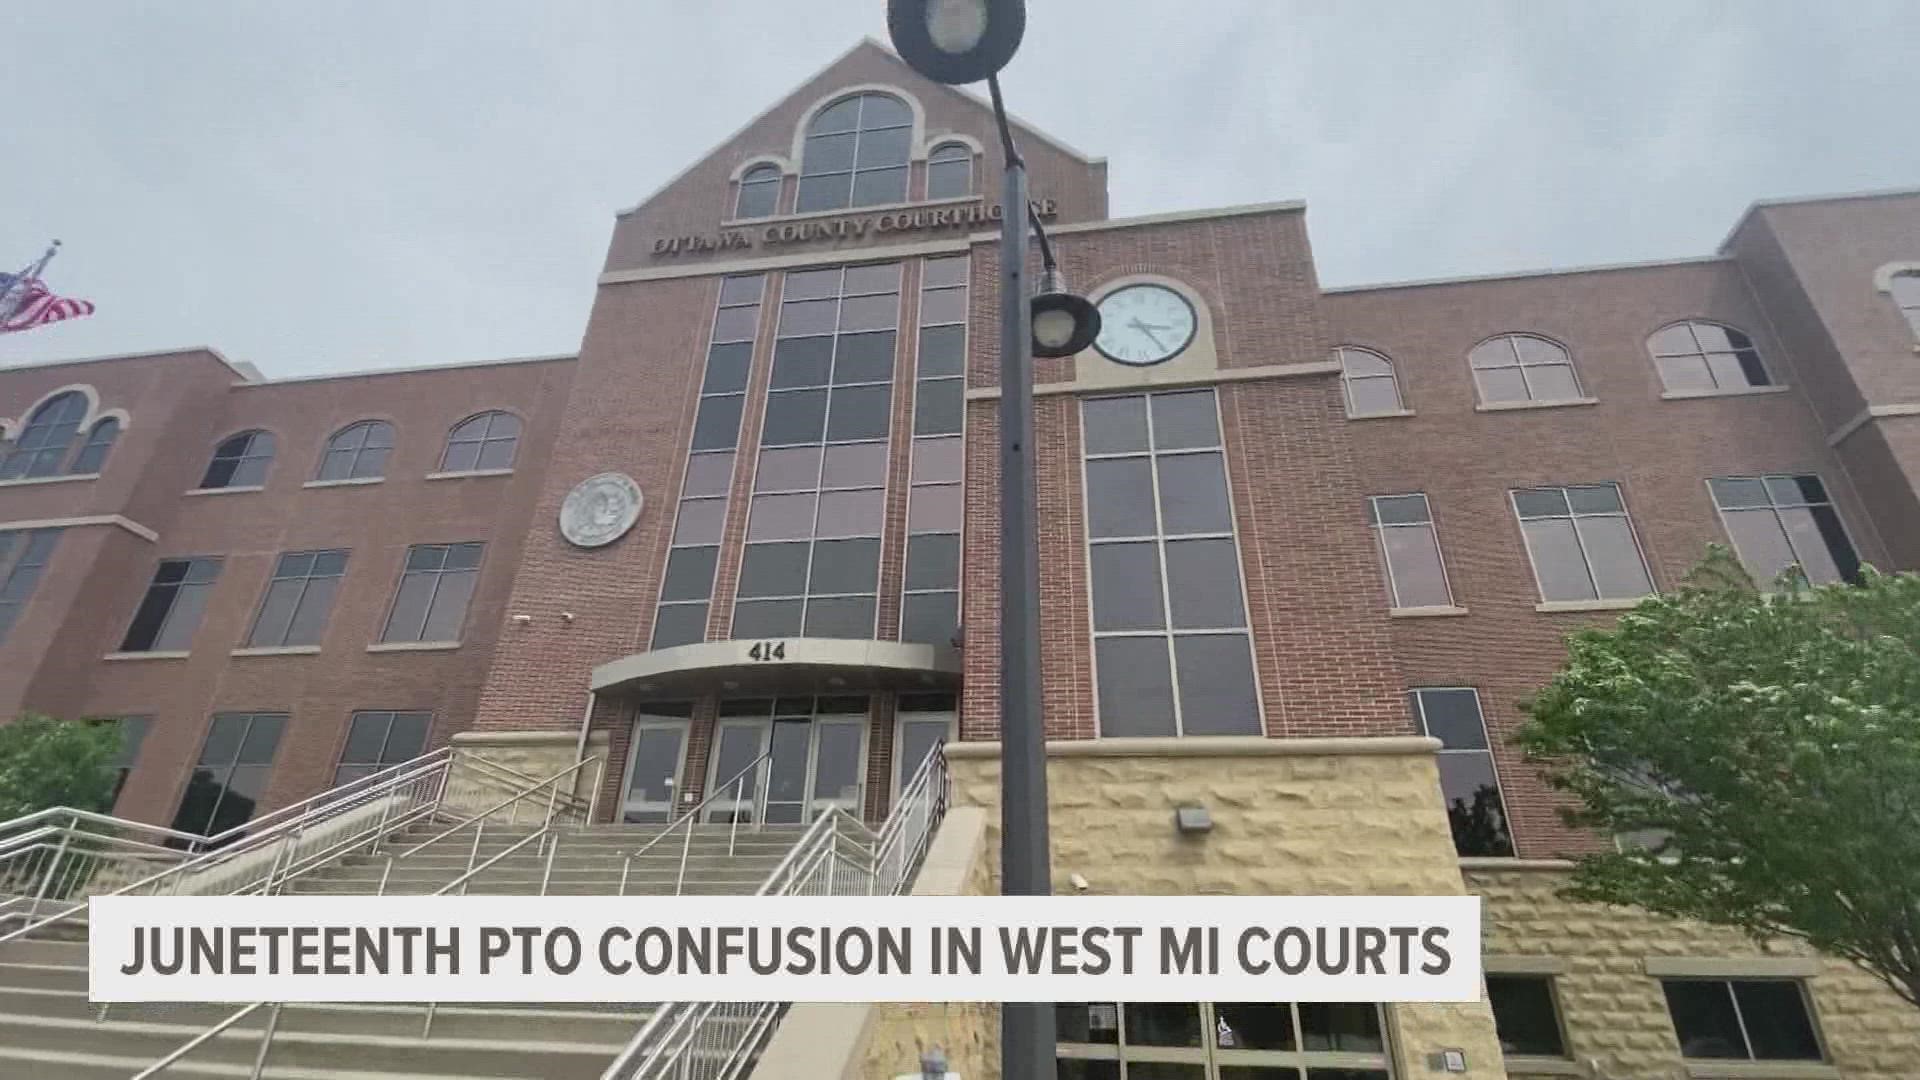 A new order from the Michigan Supreme Court is causing confusion at some West Michigan Courthouses.